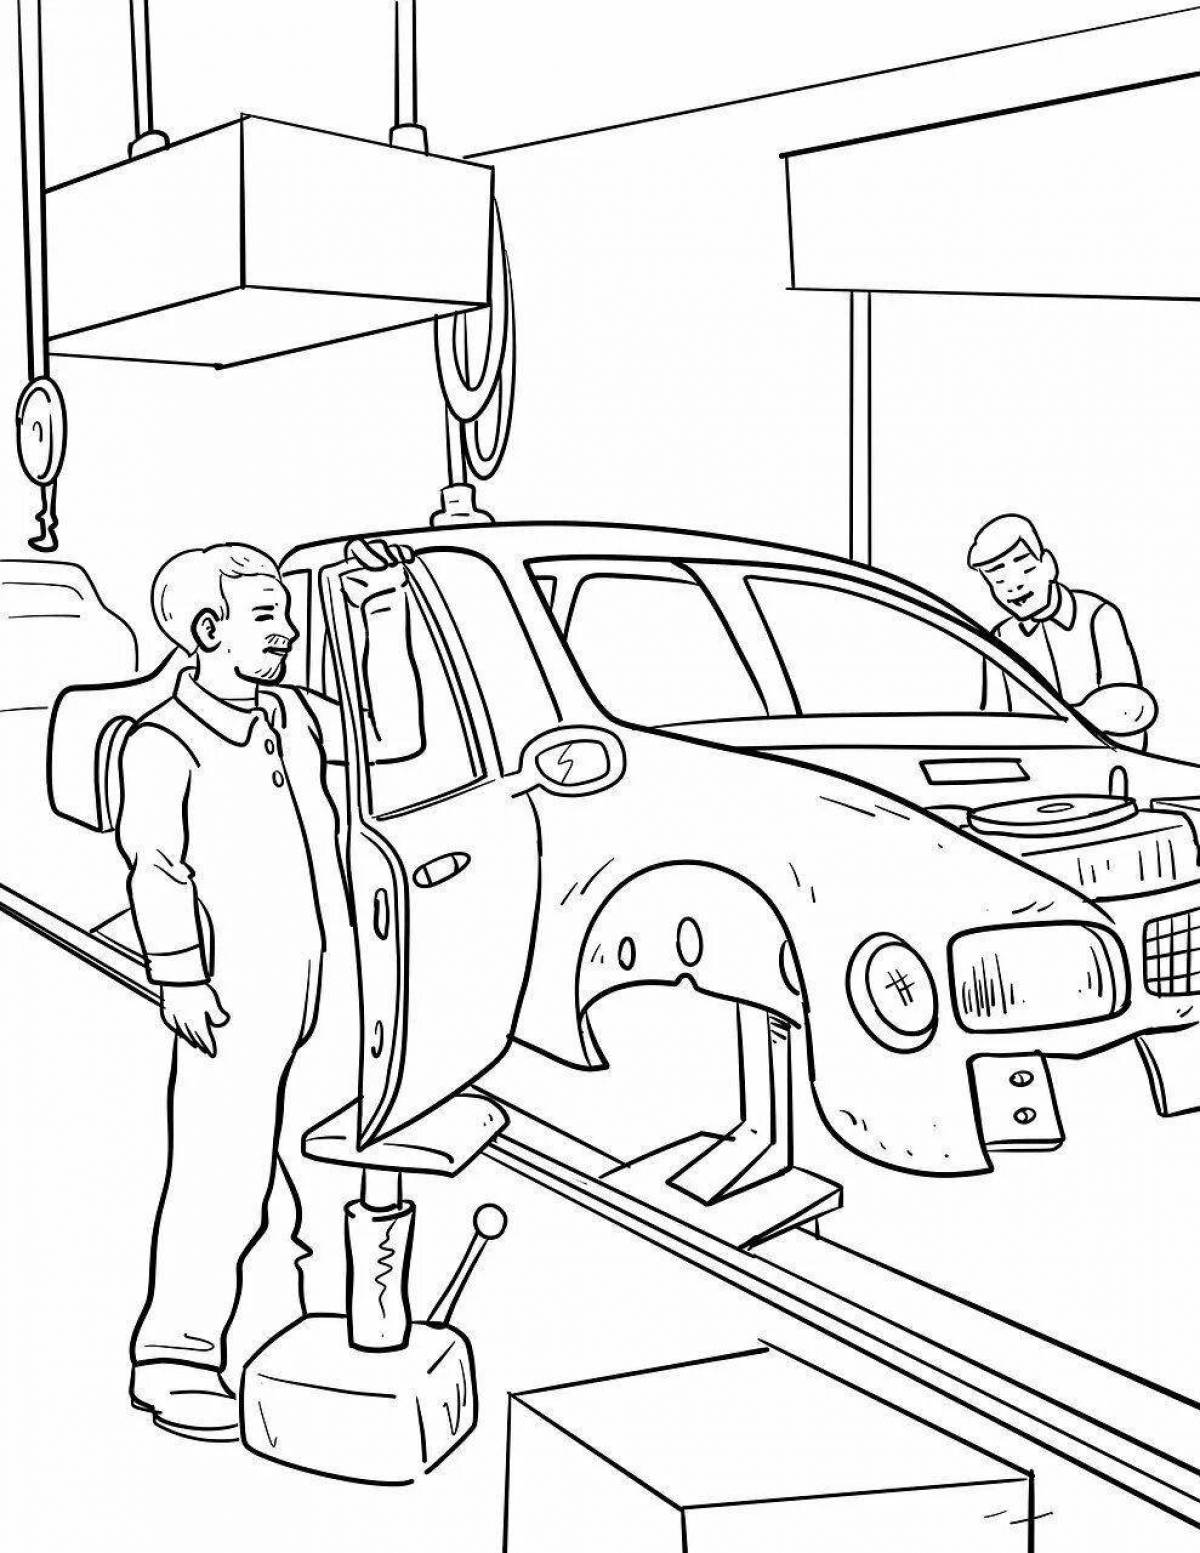 Playful car mechanic coloring page for kids